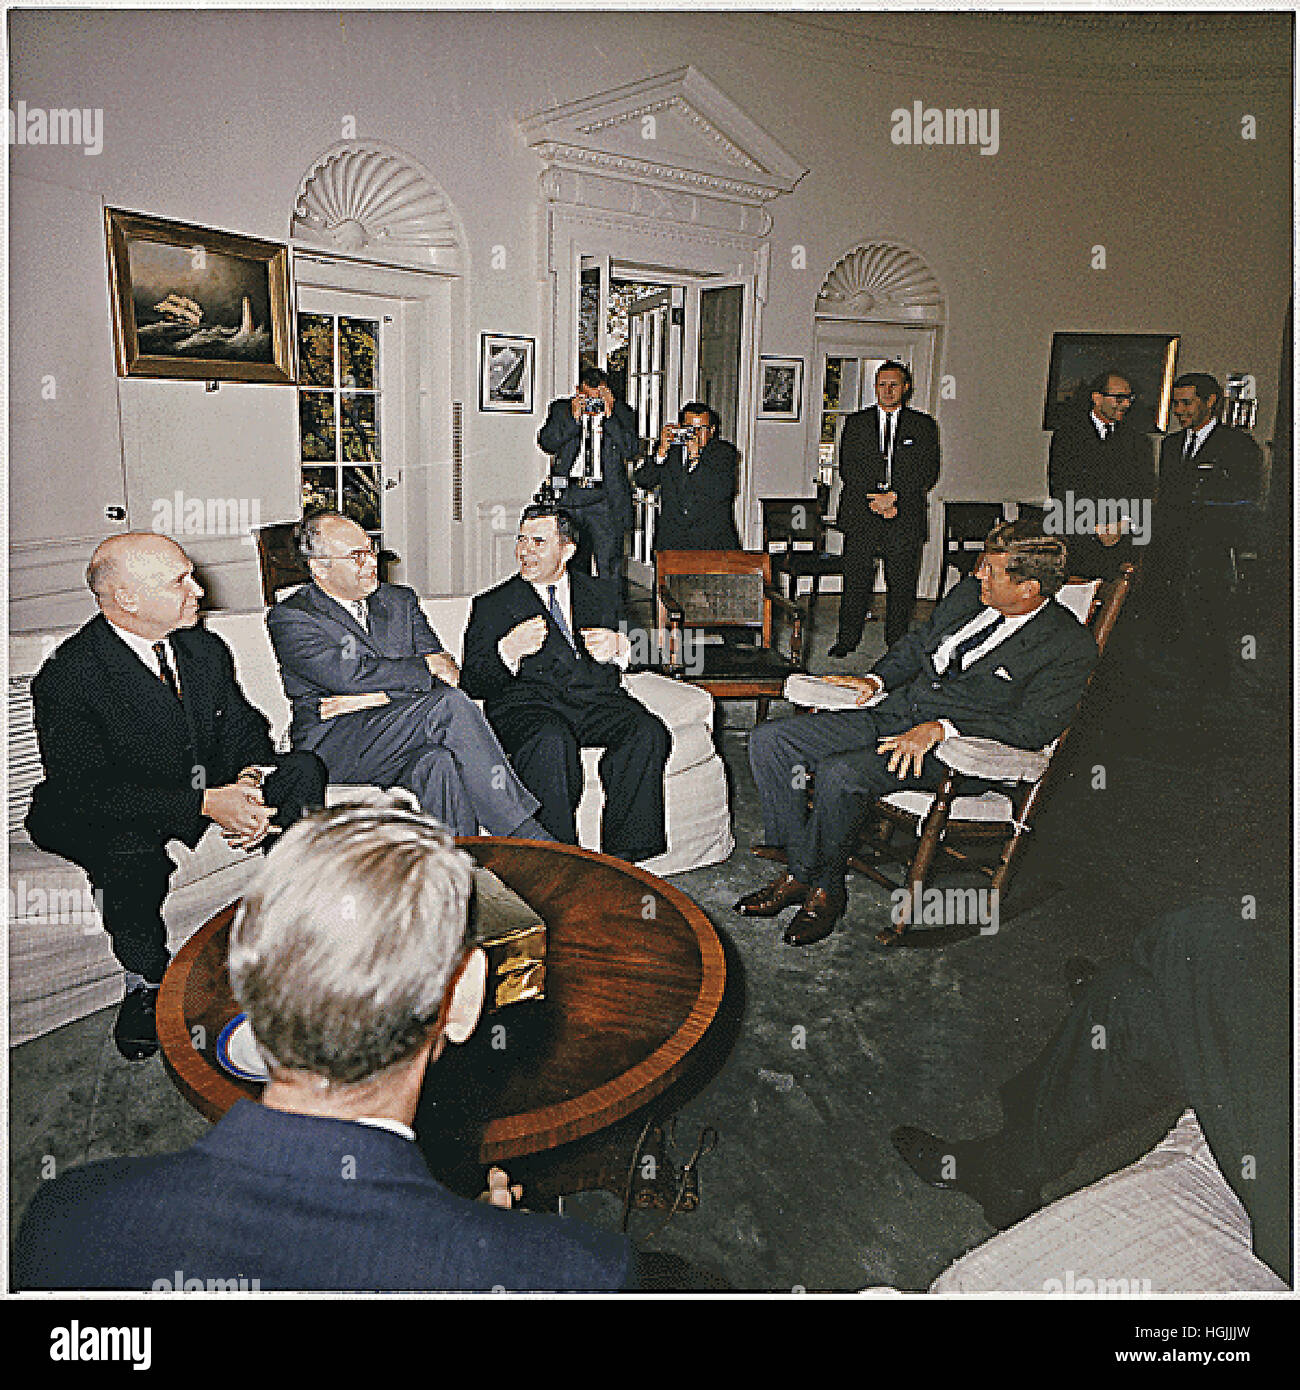 Washington, DC -- United States President John F. Kennedy meets with Soviet officials in the Oval Office of the White House in Washington, DC on October 18, 1962. Left to right: Soviet Deputy Minister Vladimir S. Seyemenov, Ambassador of the USSR Anatoly F. Dobrynin, Soviet Minister of Foreign Affairs Andrei Gromyko, President Kennedy, photographers, aides. Credit: Robert Knudsen/White House via CNP - NO WIRE SERVICE - Photo: Robert Knudsen/Consolidated News Photos/Robert Knudsen - White House via CNP Stock Photo